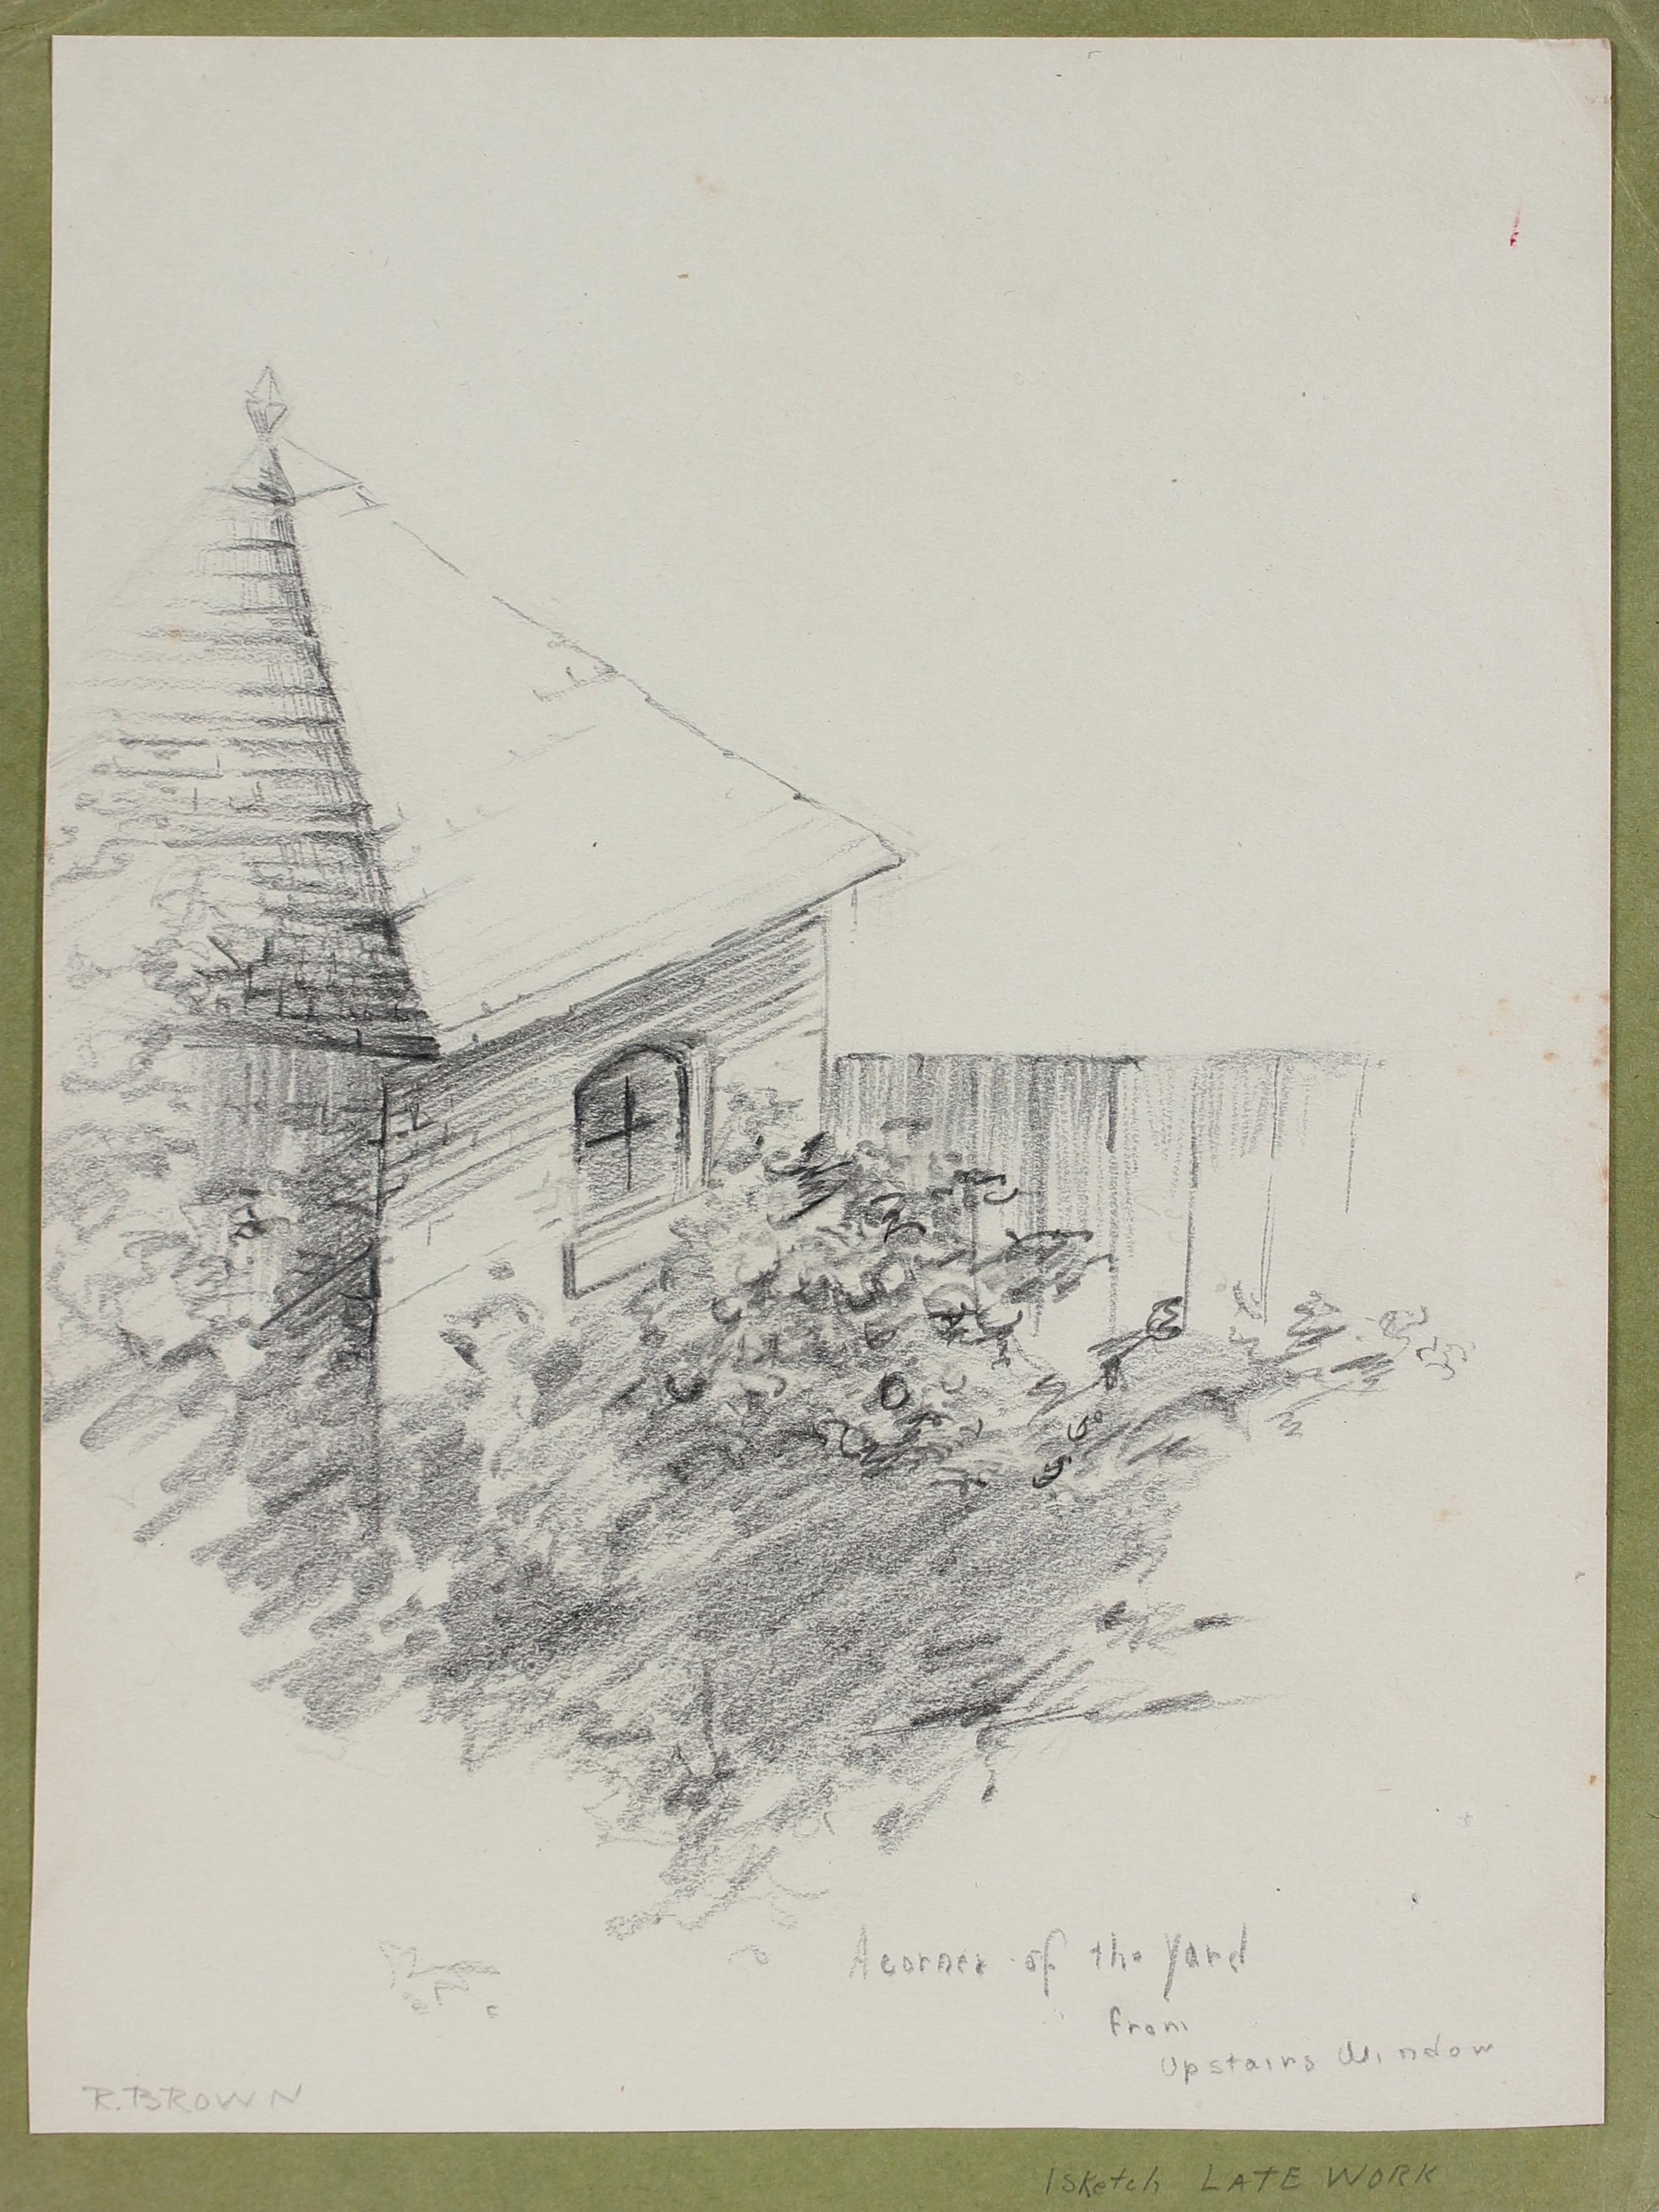 Unknown Landscape Art - "A Corner of the Yard From Upstairs Window" 20th Century Graphite